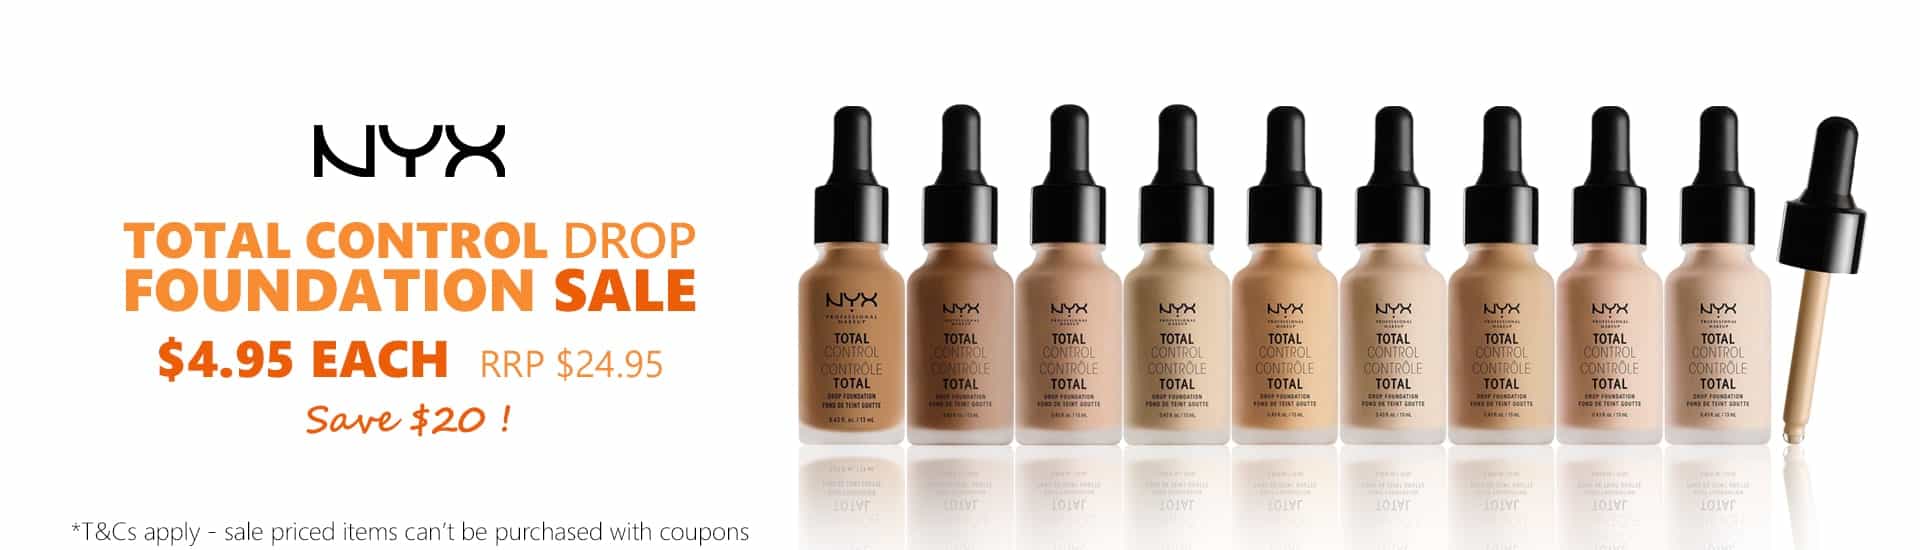 Total Control Drop foundation sale for only $4.95, RRP $24.95